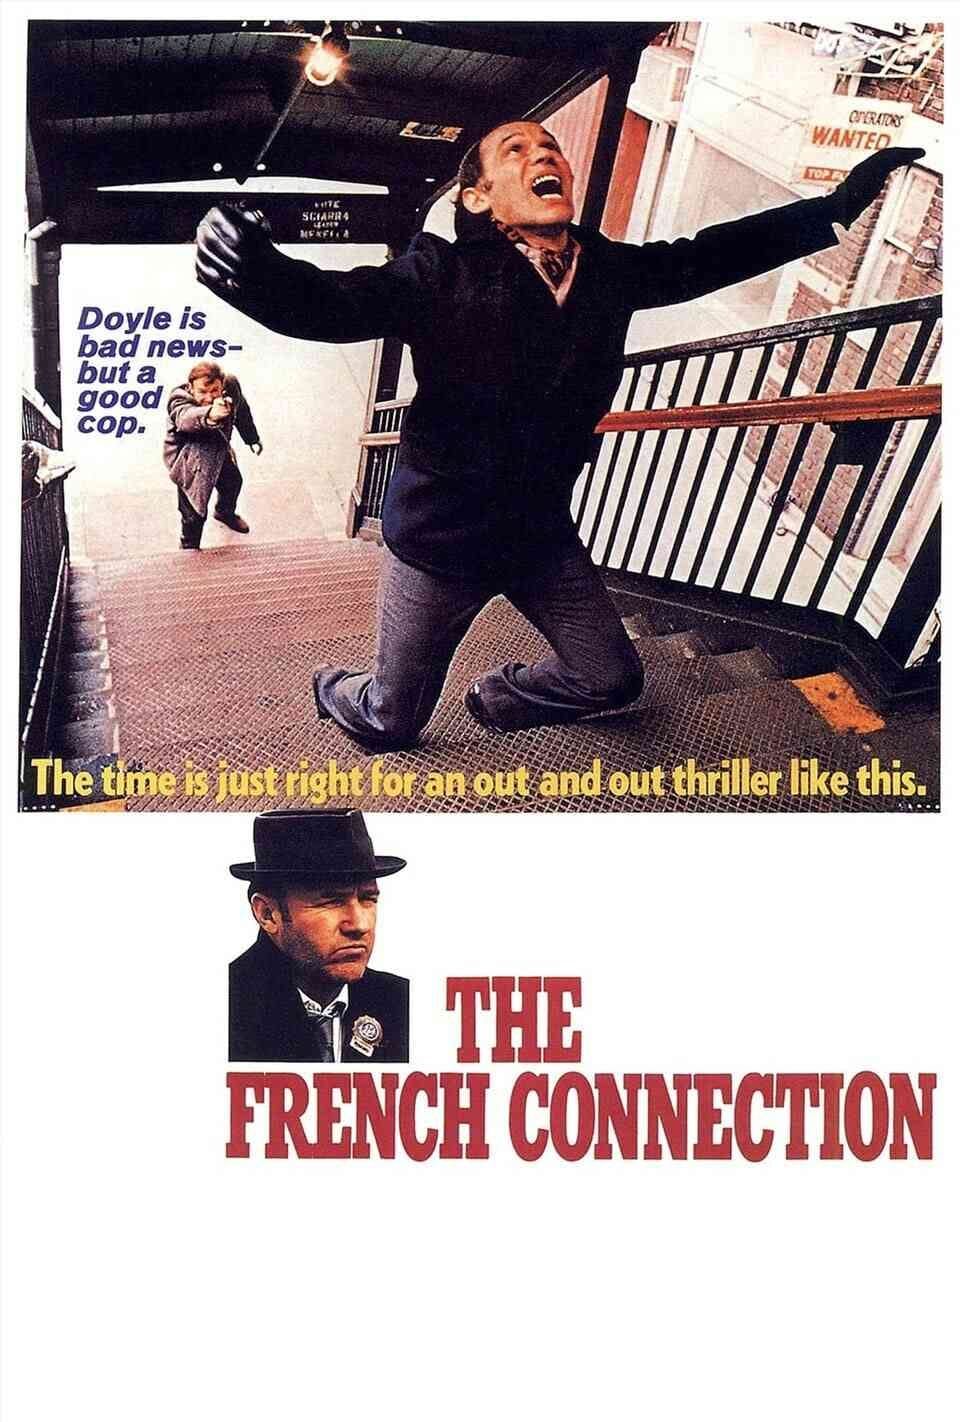 Read The French Connection screenplay (poster)